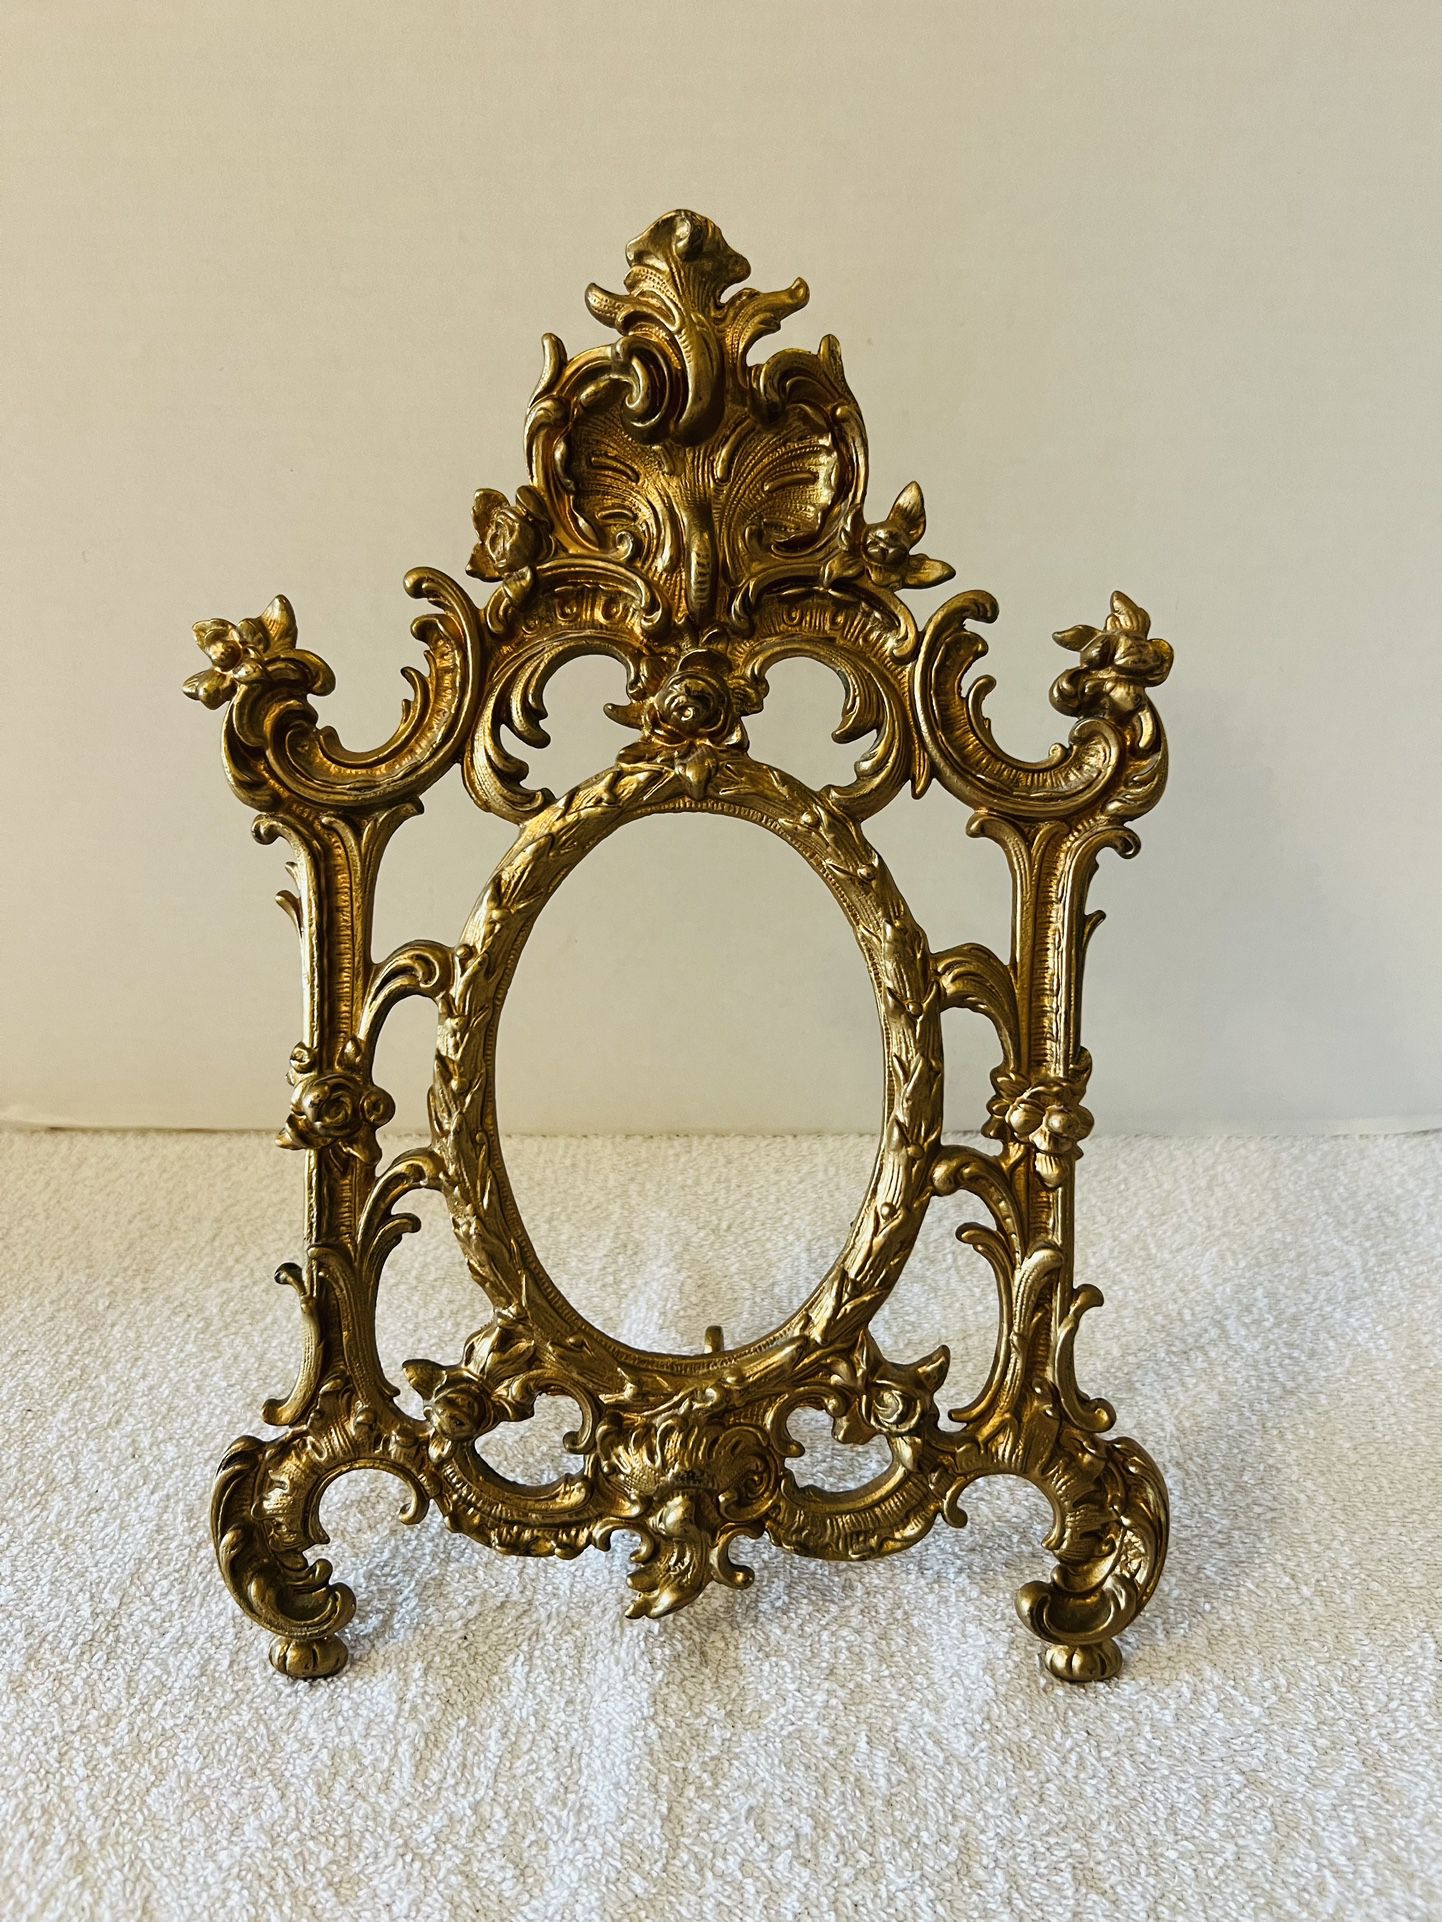 Antique Gold Finish/Heavy  Easel Style Dresser / Table-Top Portrait or Mirror Frame/Marked